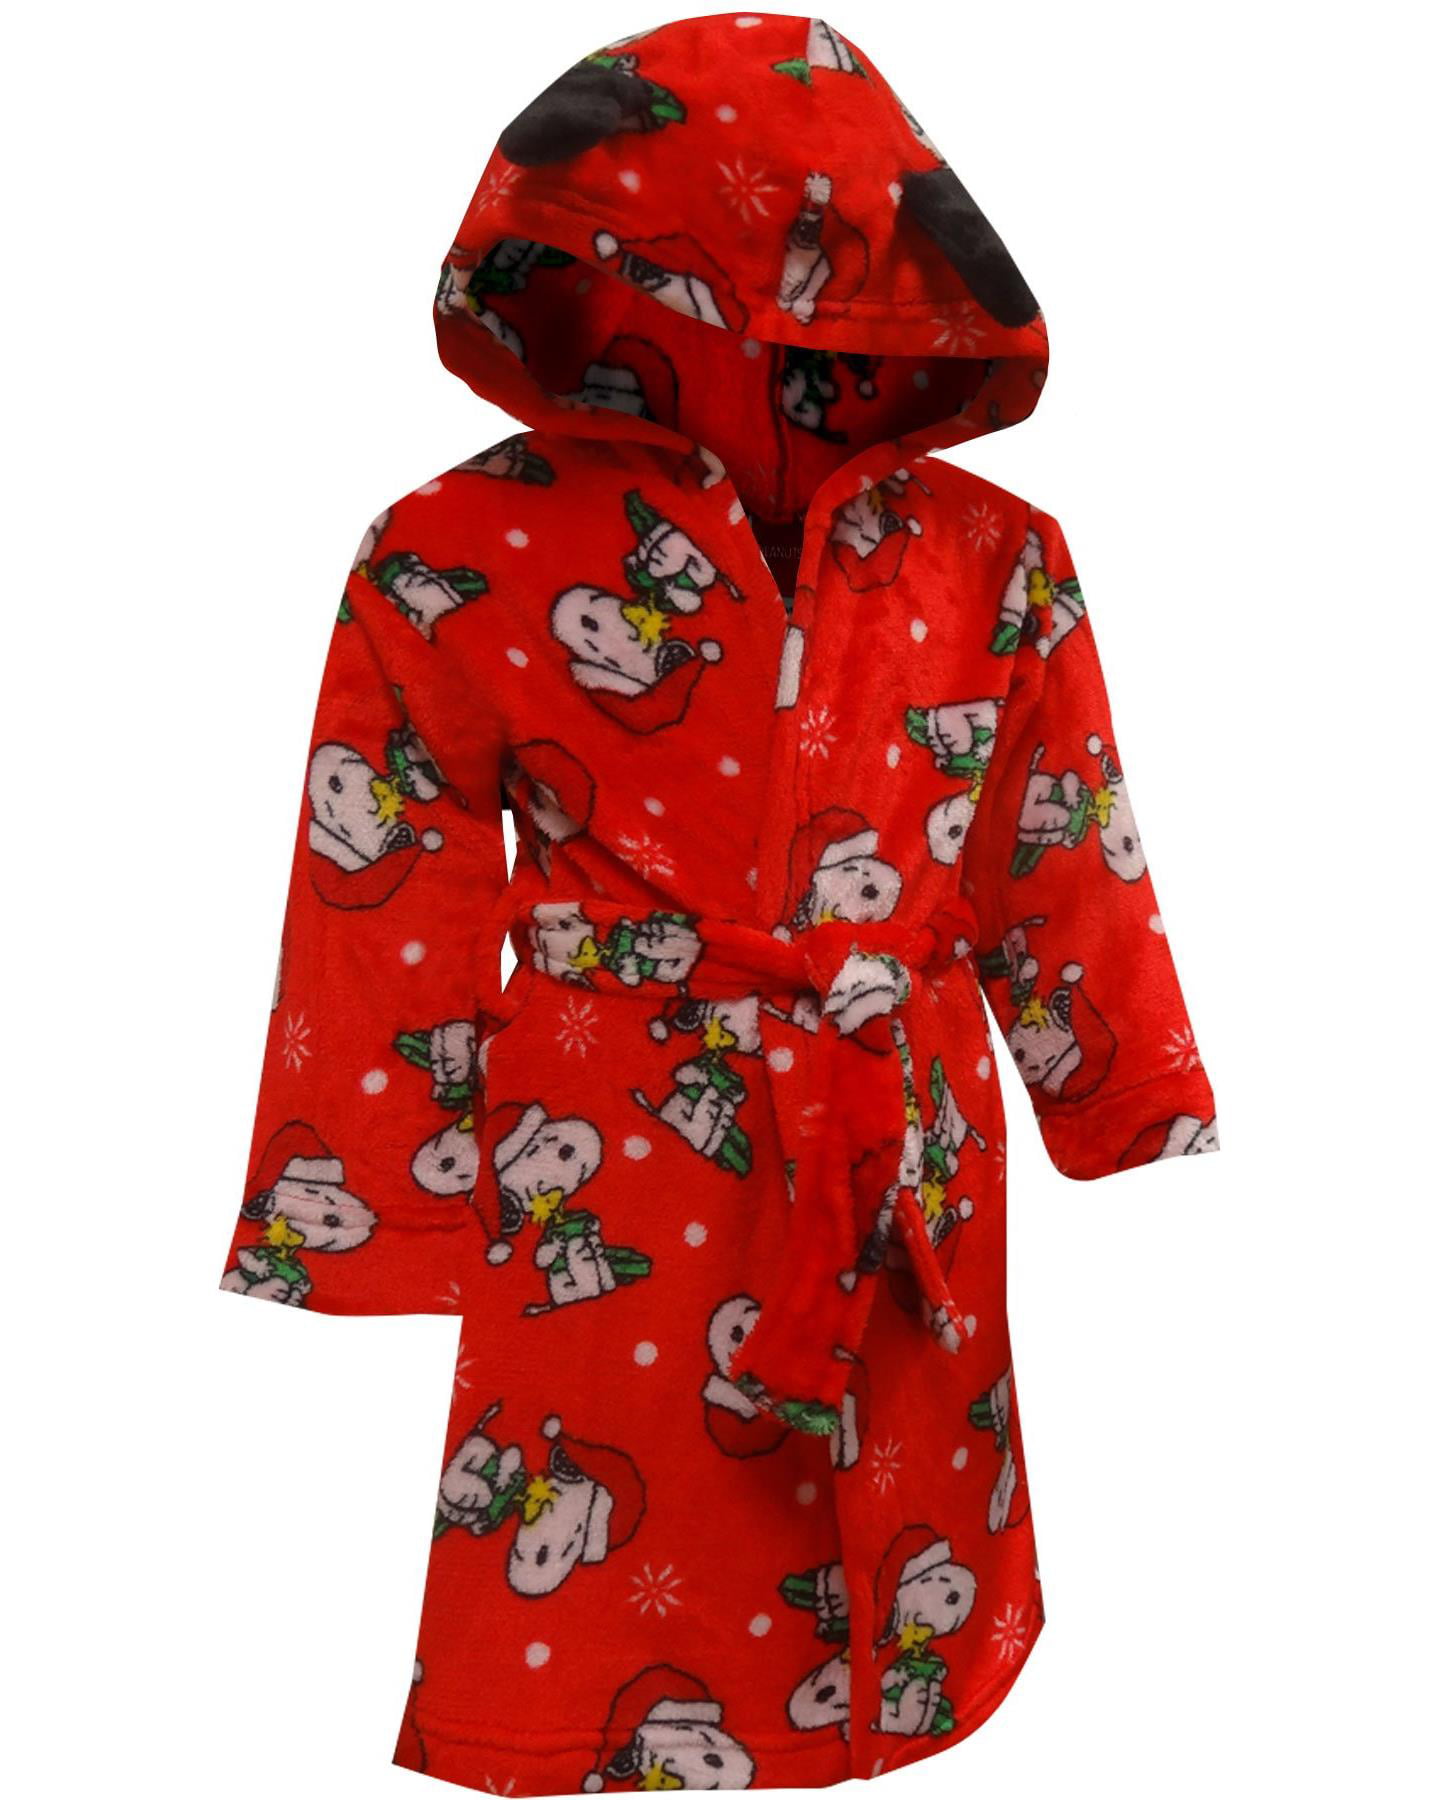 Peanuts Toddler Boys Plush Holiday Robe Size 2T 3T 4T 